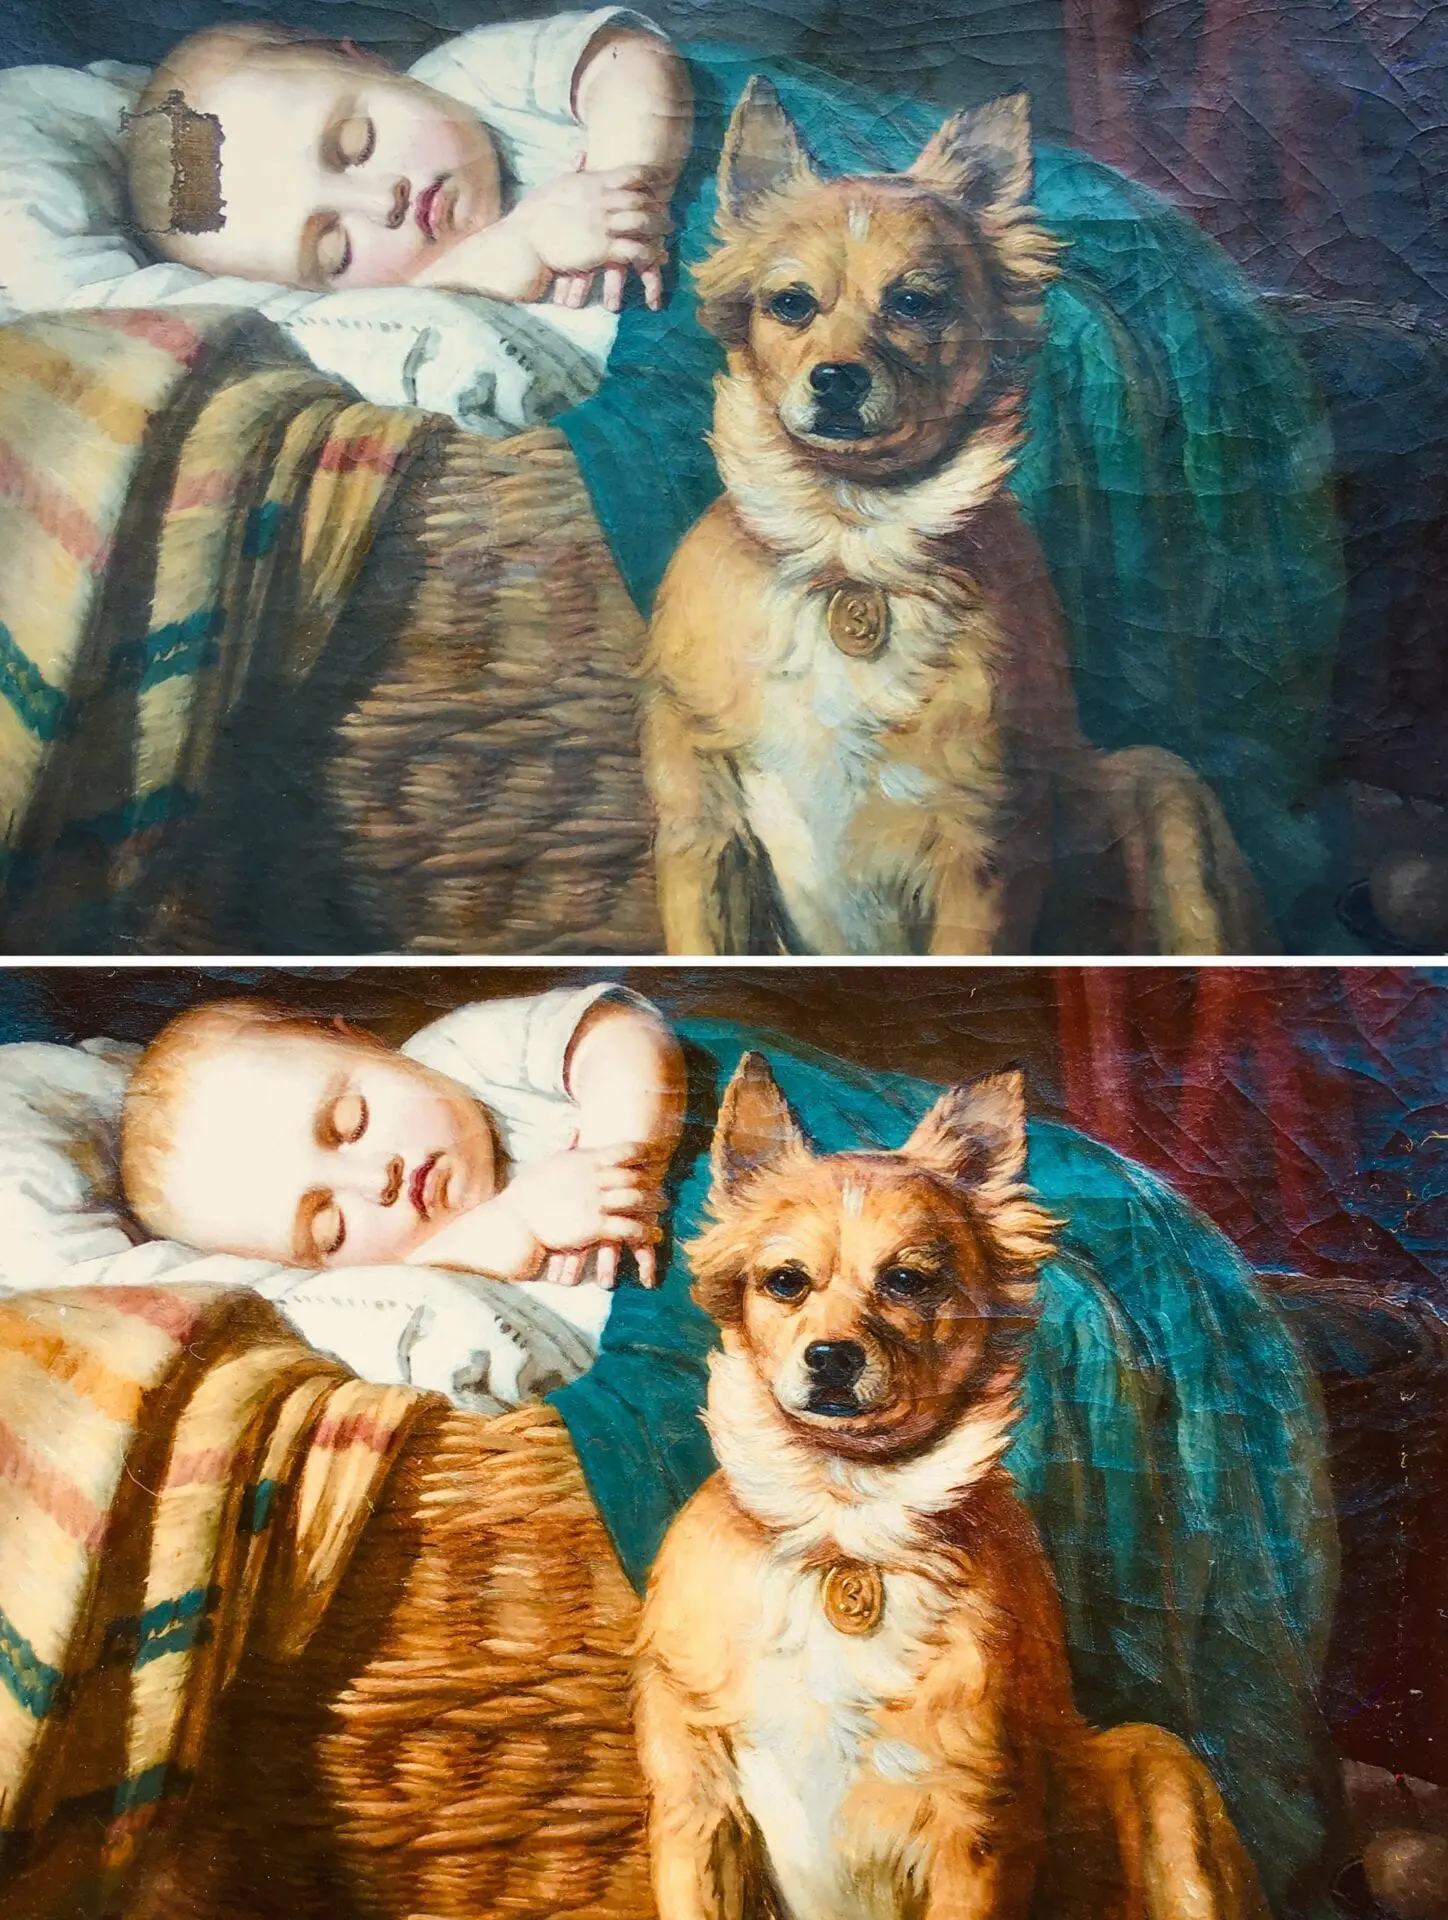 A painting of a baby and a dog